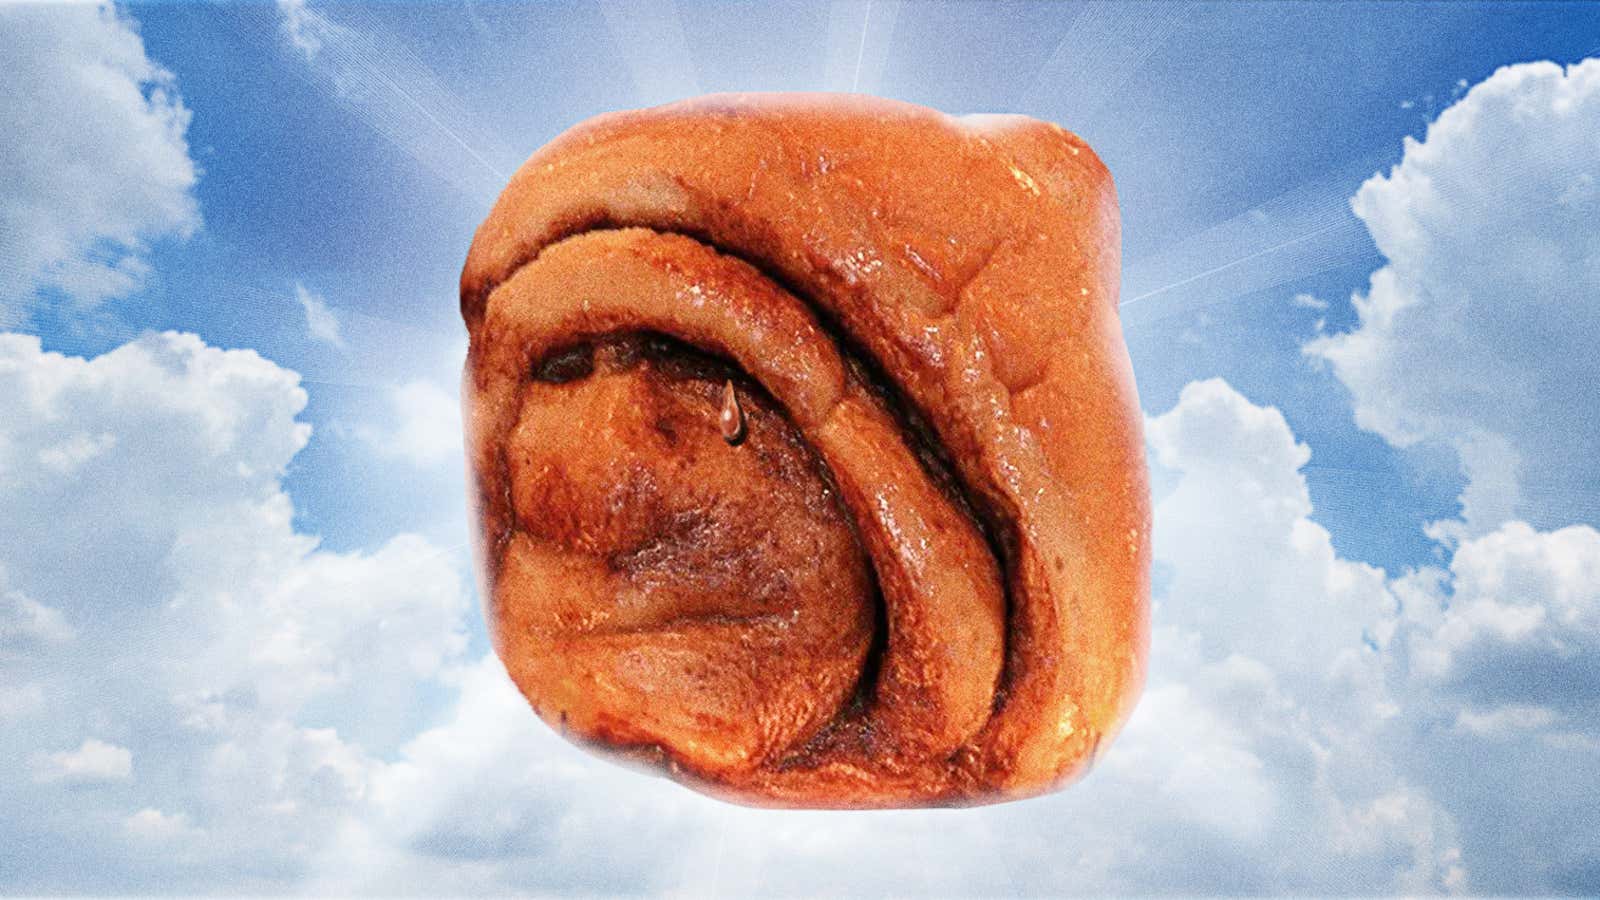 25 years after its discovery, the NunBun remains a divine mystery